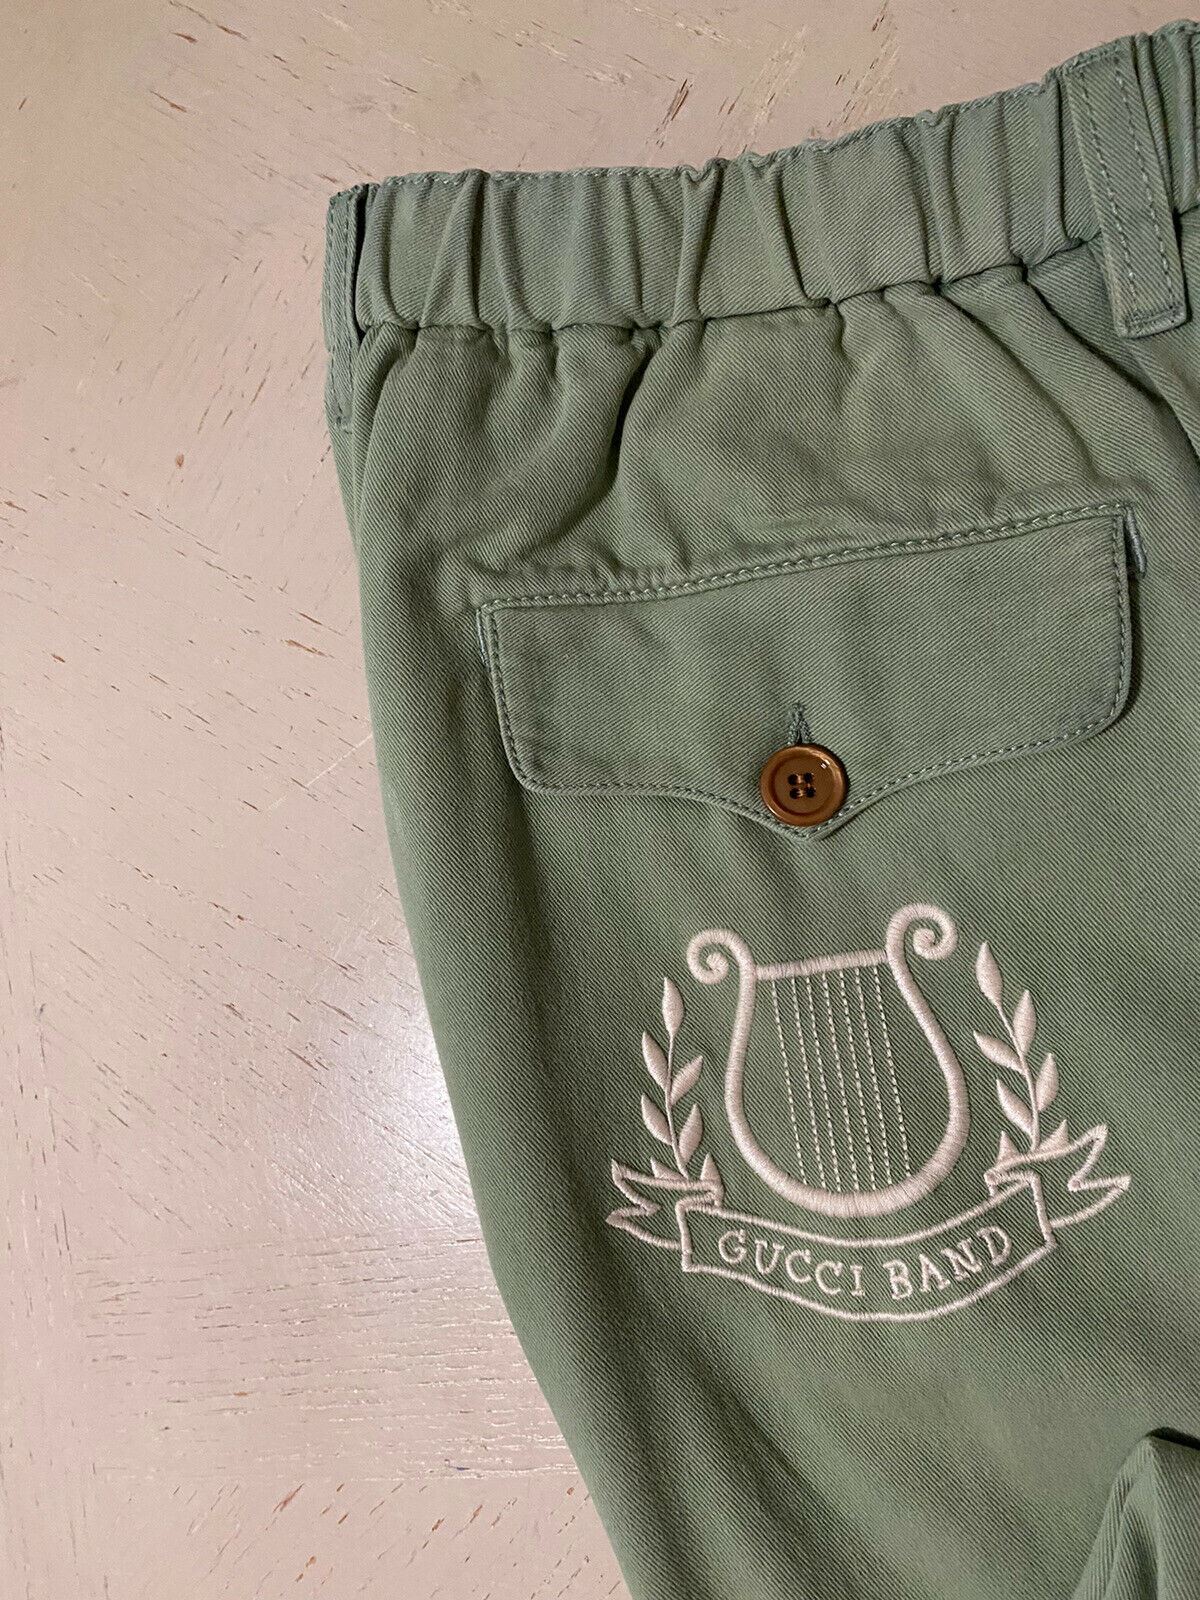 New $1200 Gucci Men’s Jegging Pants Green 36 US ( 52 Eu ) Made in Italy